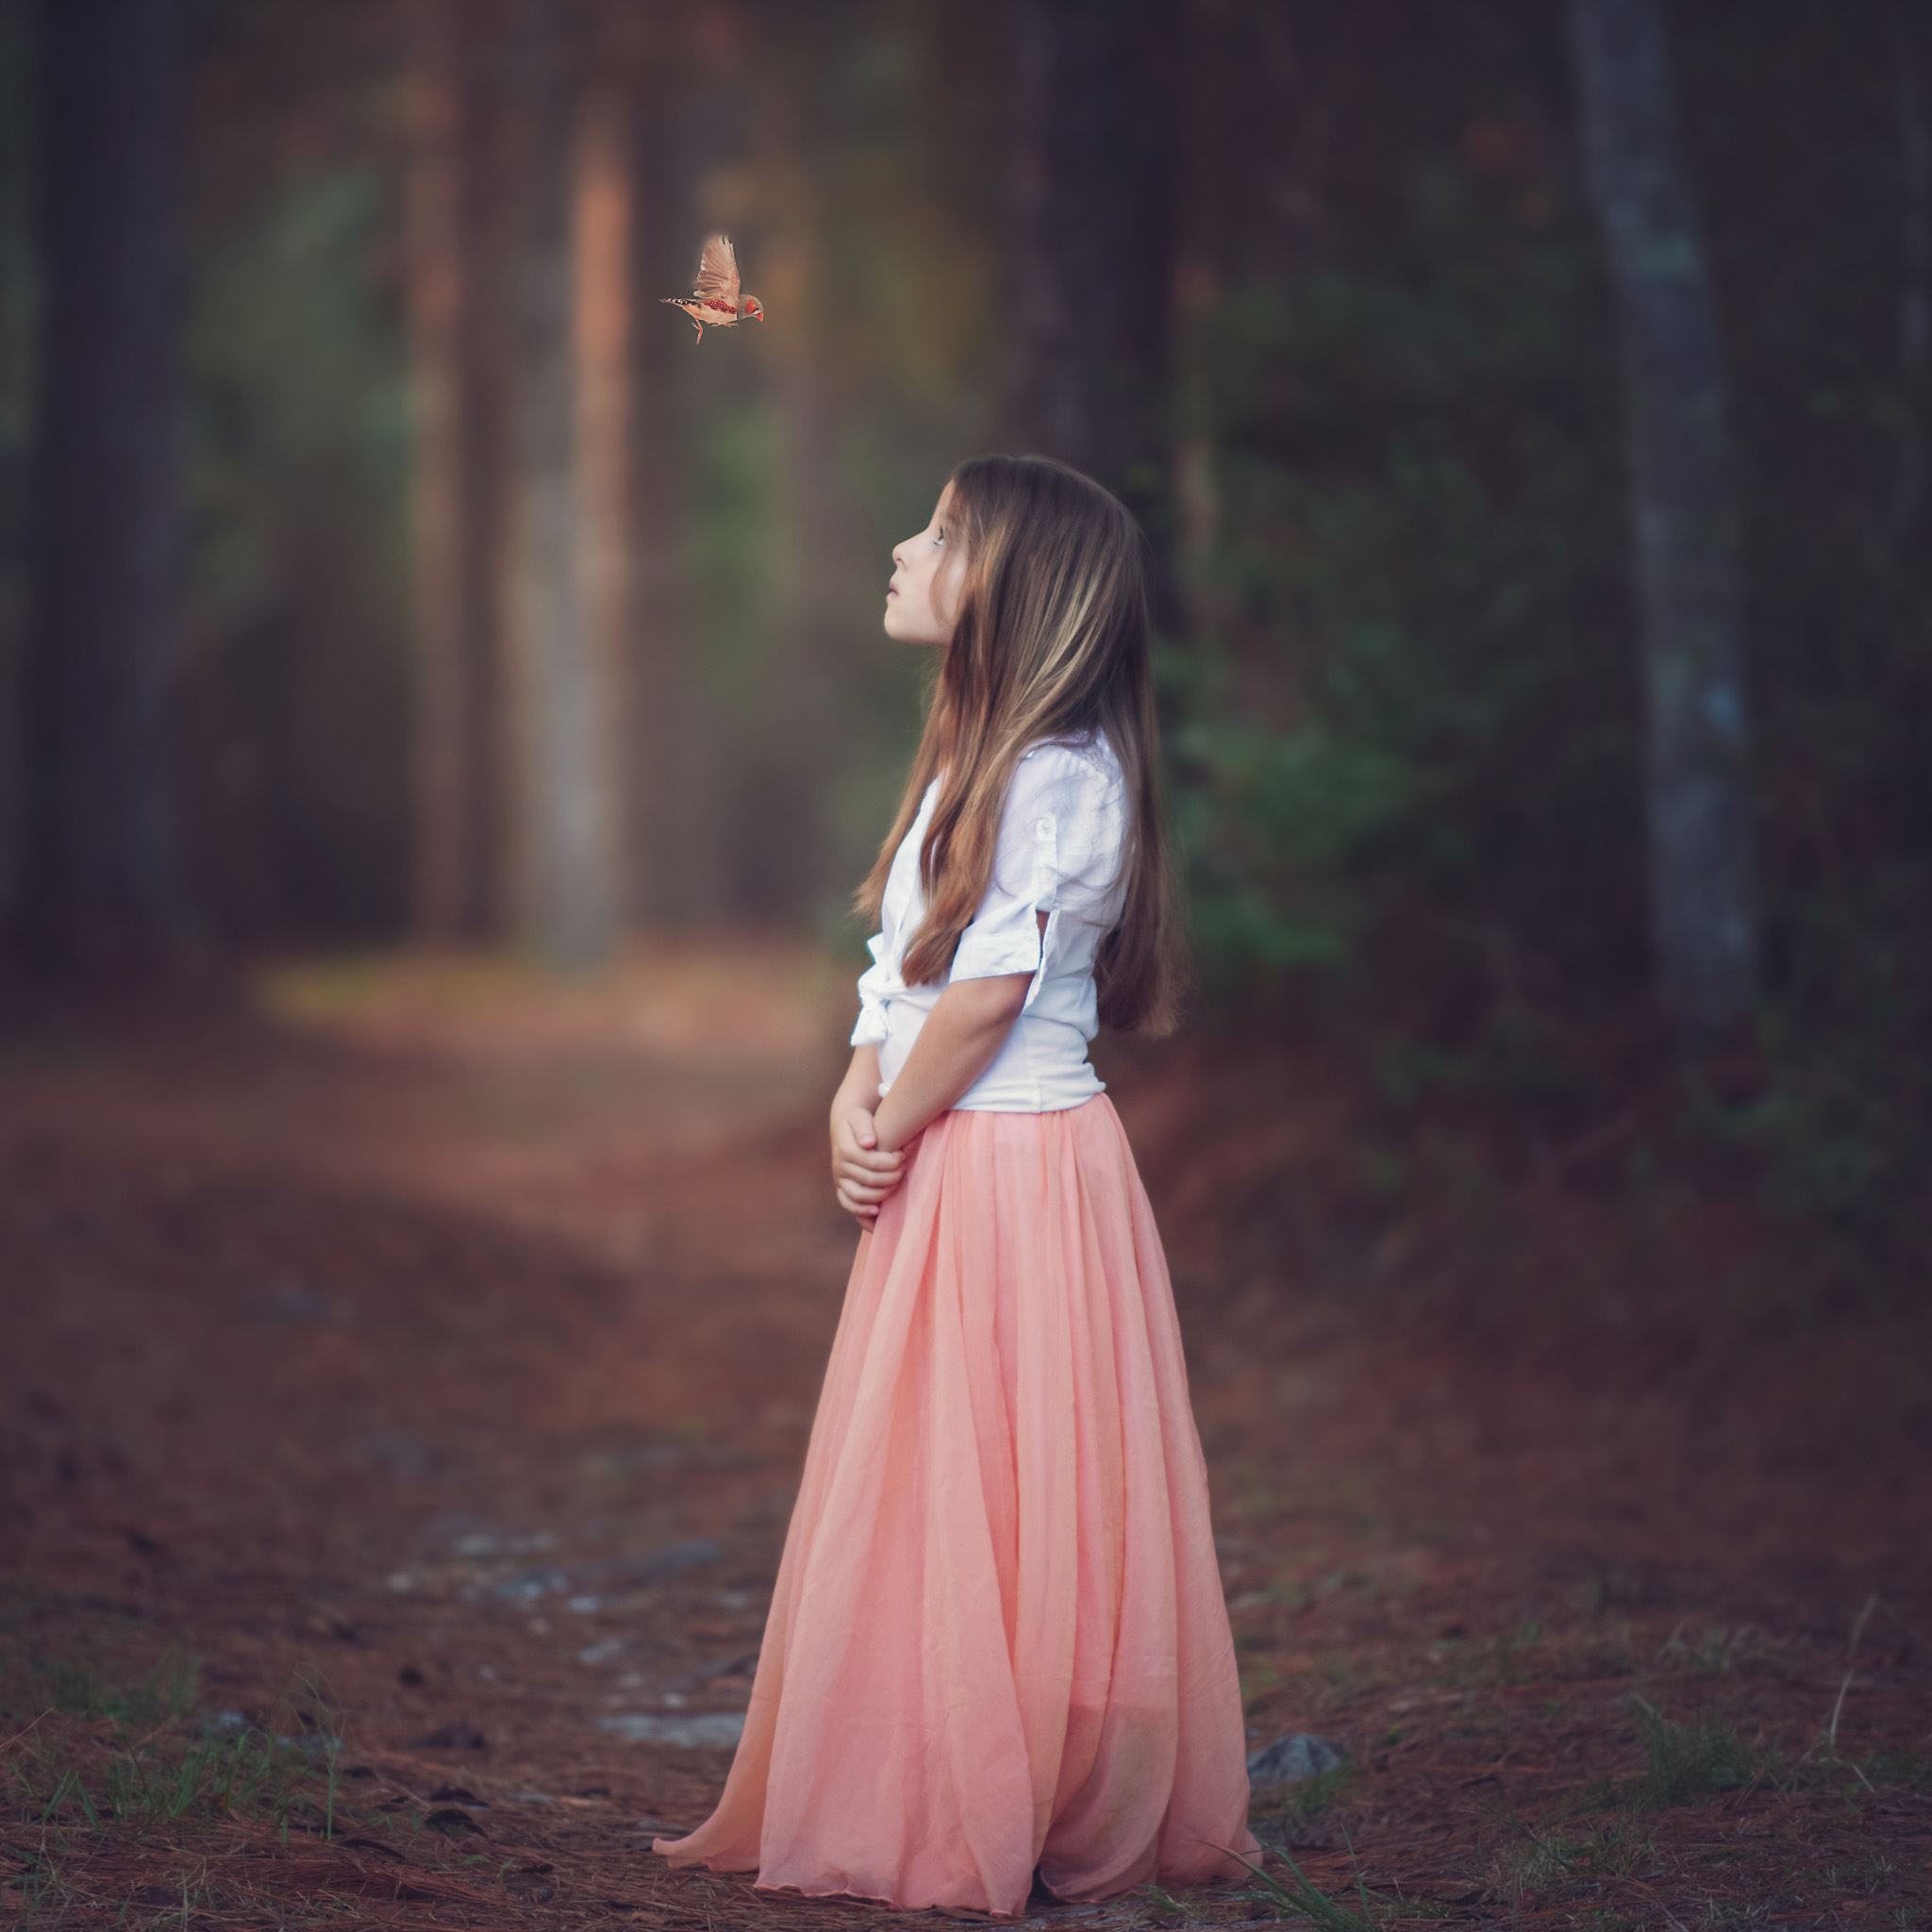 Girl in the forest iPad Air wallpaper 